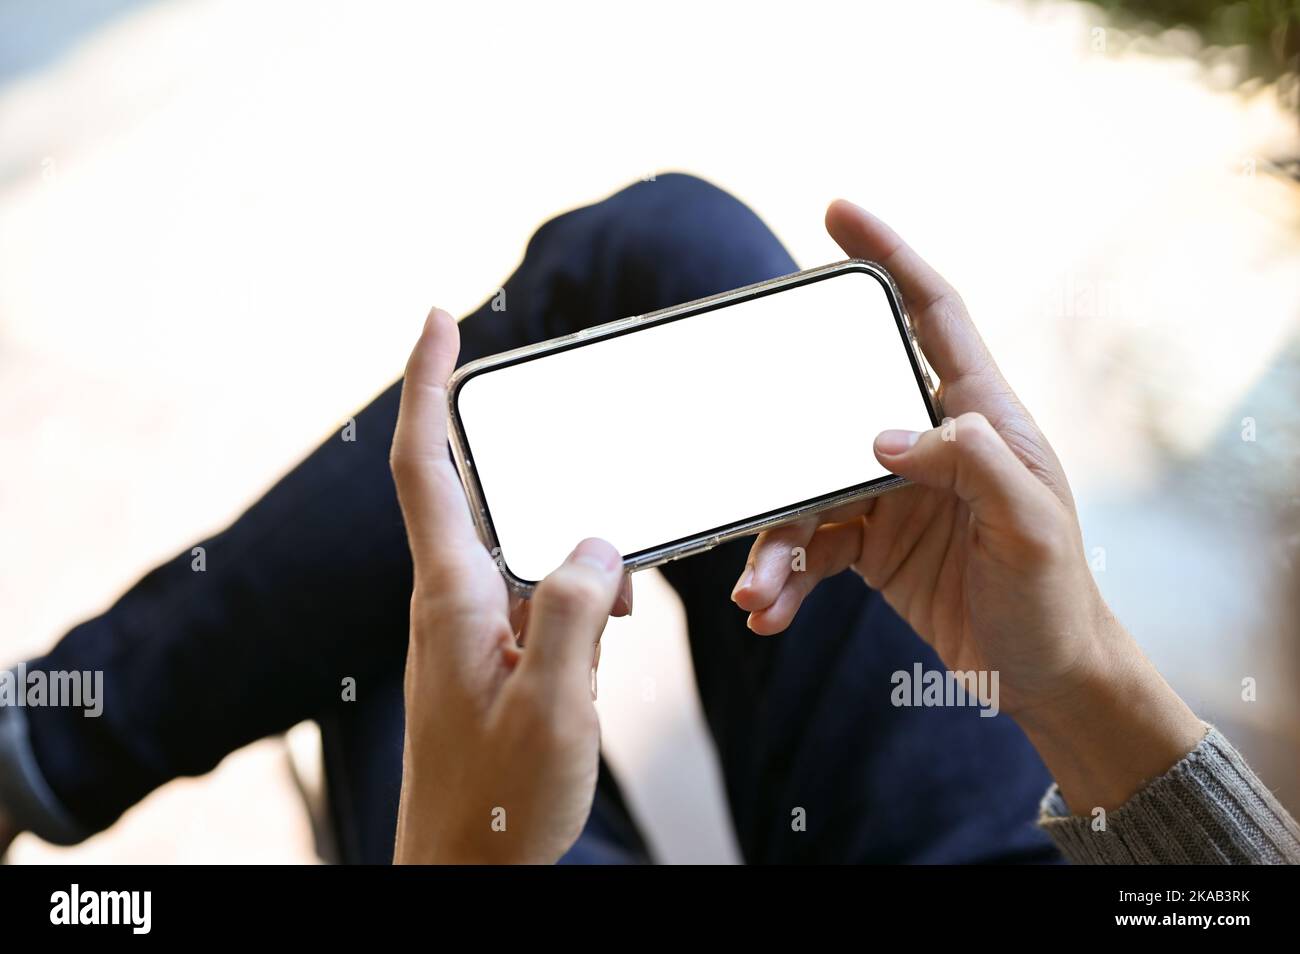 A smartphone white screen mockup in a horizontal position is in a male's hands. playing game, texting, watching video. cropped and close-up Stock Photo